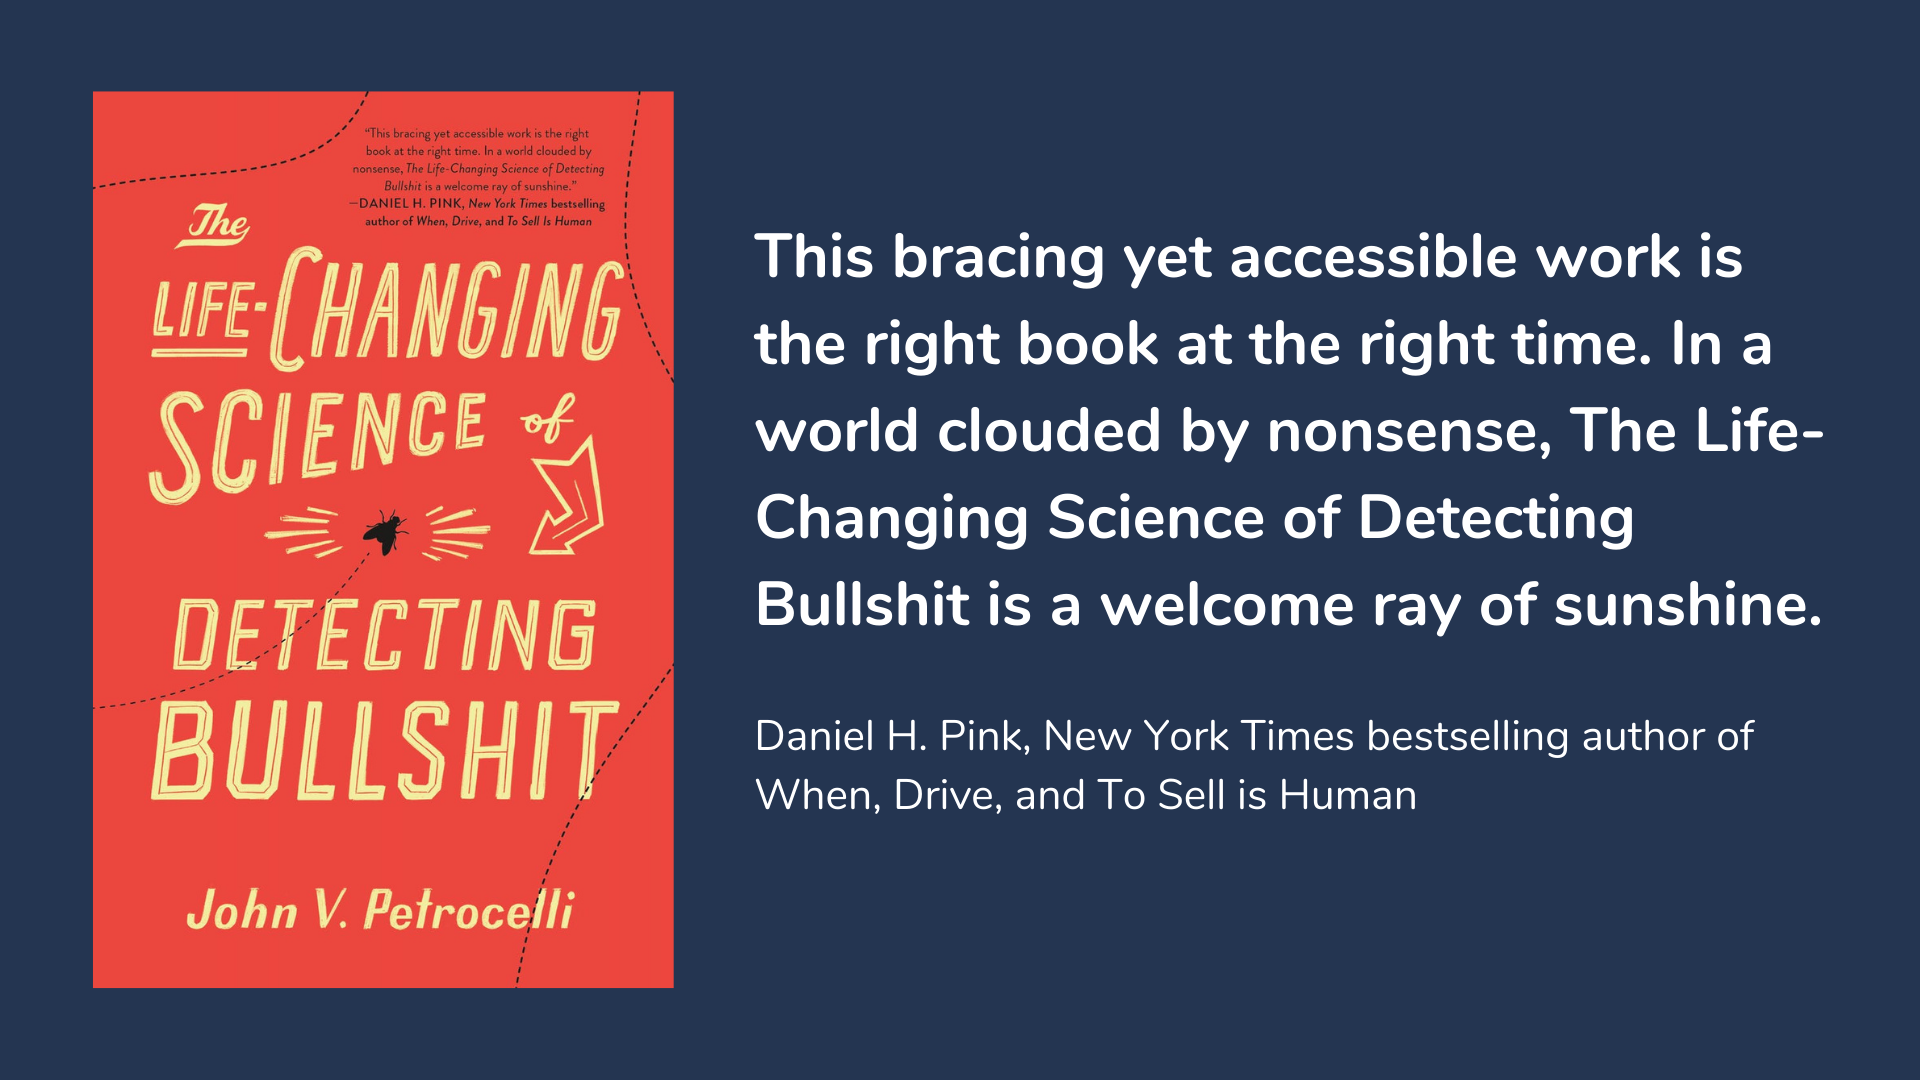 The Life-Changing Science of Detecting Bullshit, book cover and description.